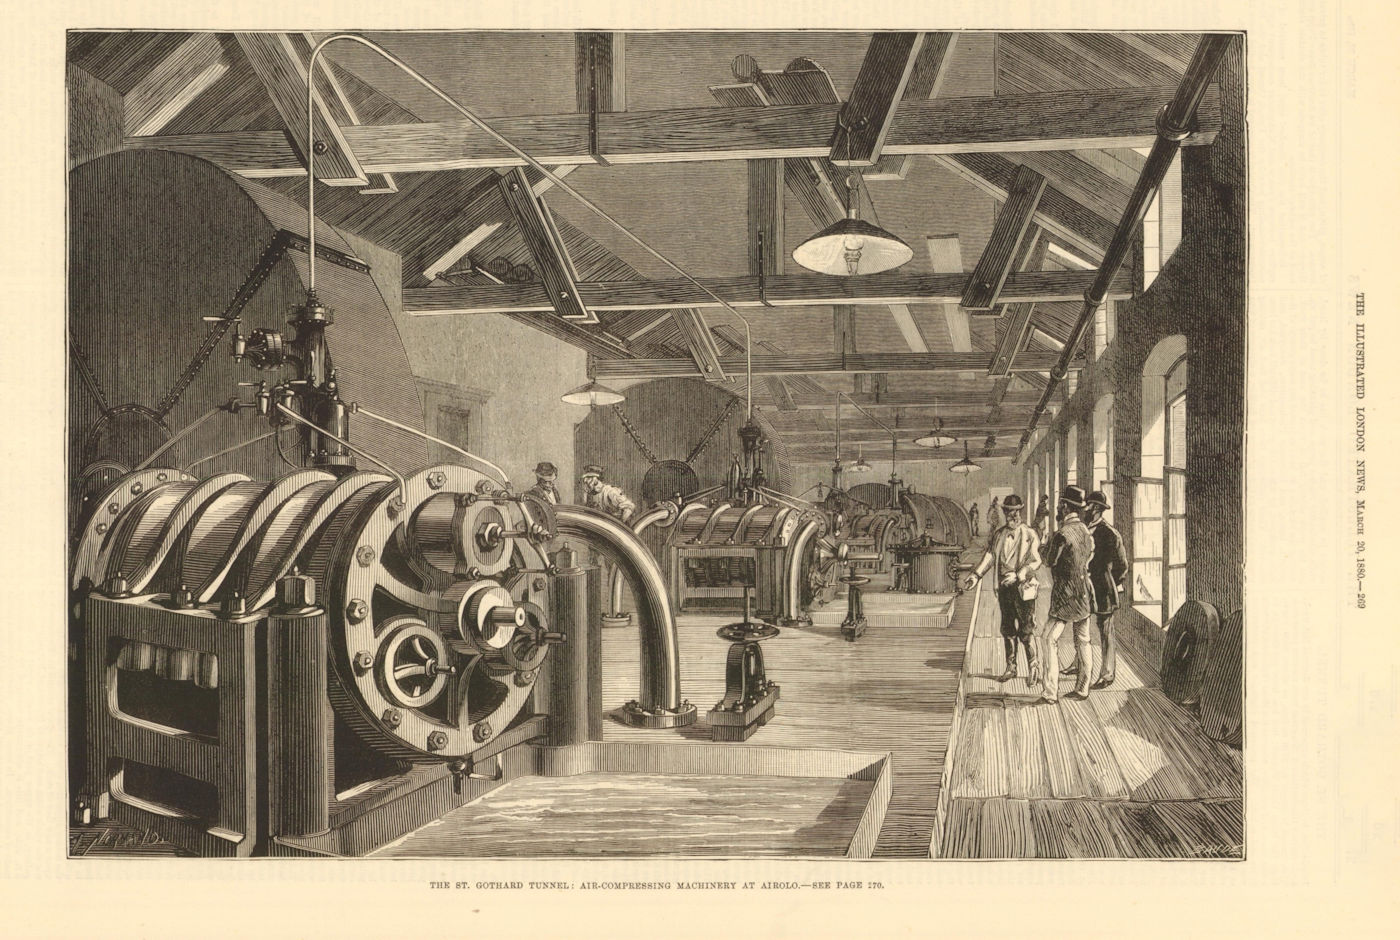 Associate Product The St. Gotthard Tunnel: Air compressing machinery at Airolo. Switzerland 1880